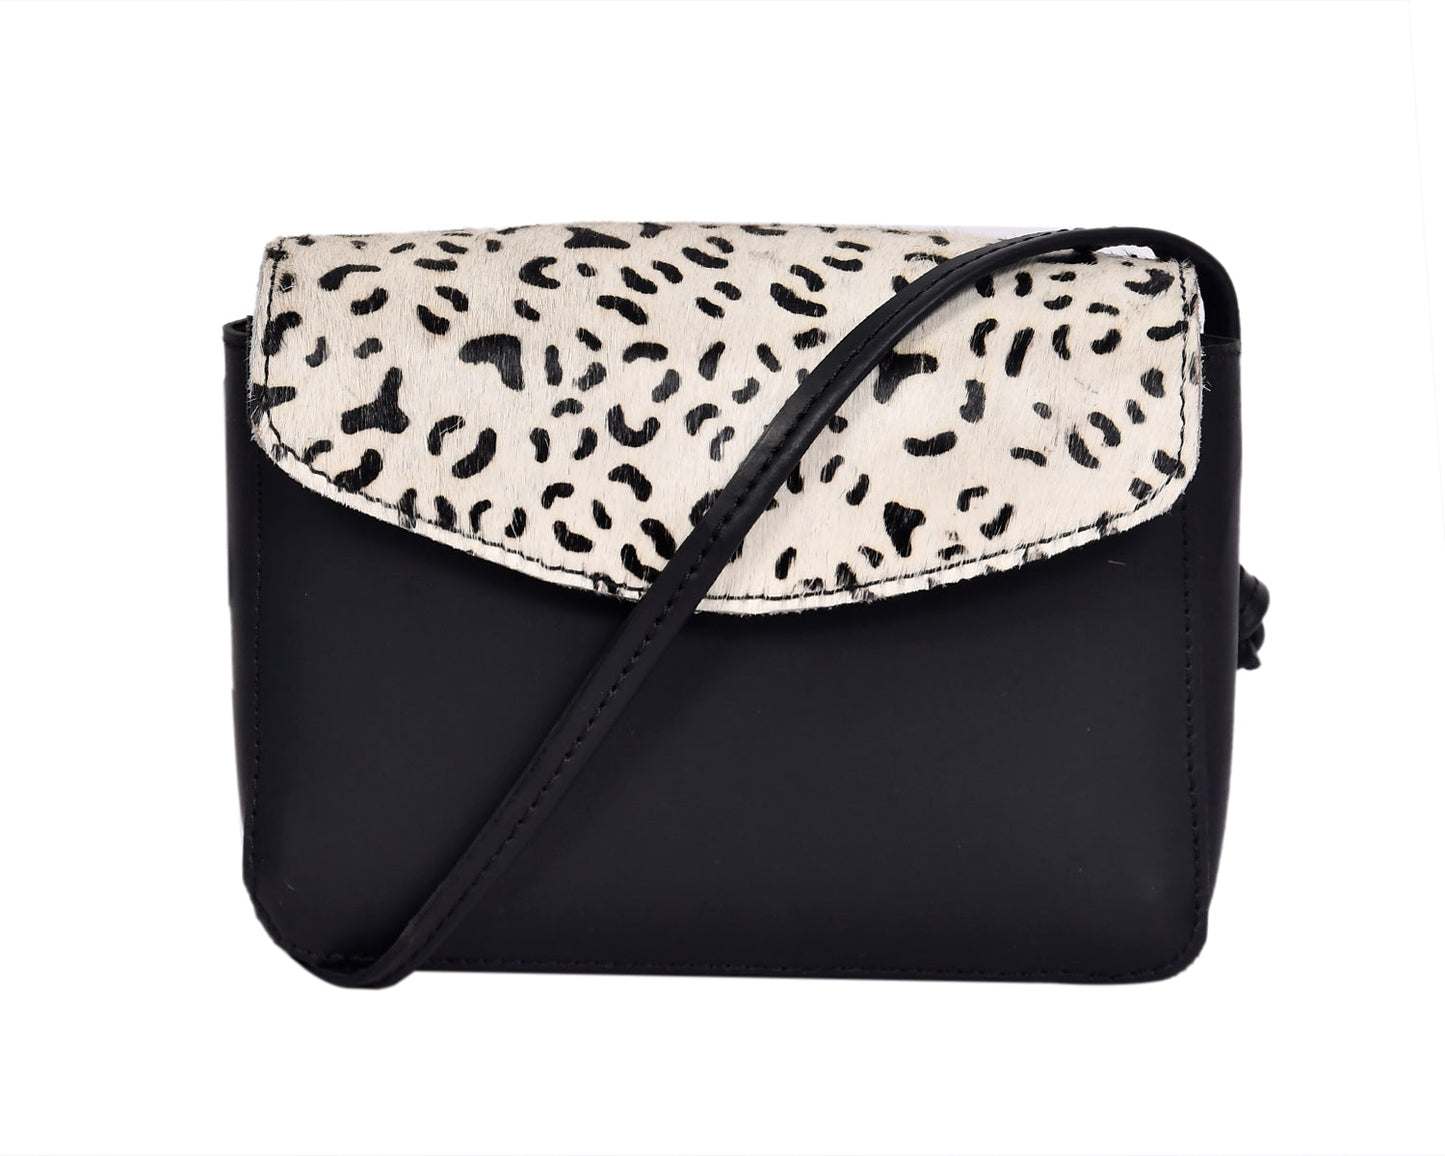 Elegance and Versatility Combined Black Leather Sling Bag with Printed Hair-On. - CELTICINDIA